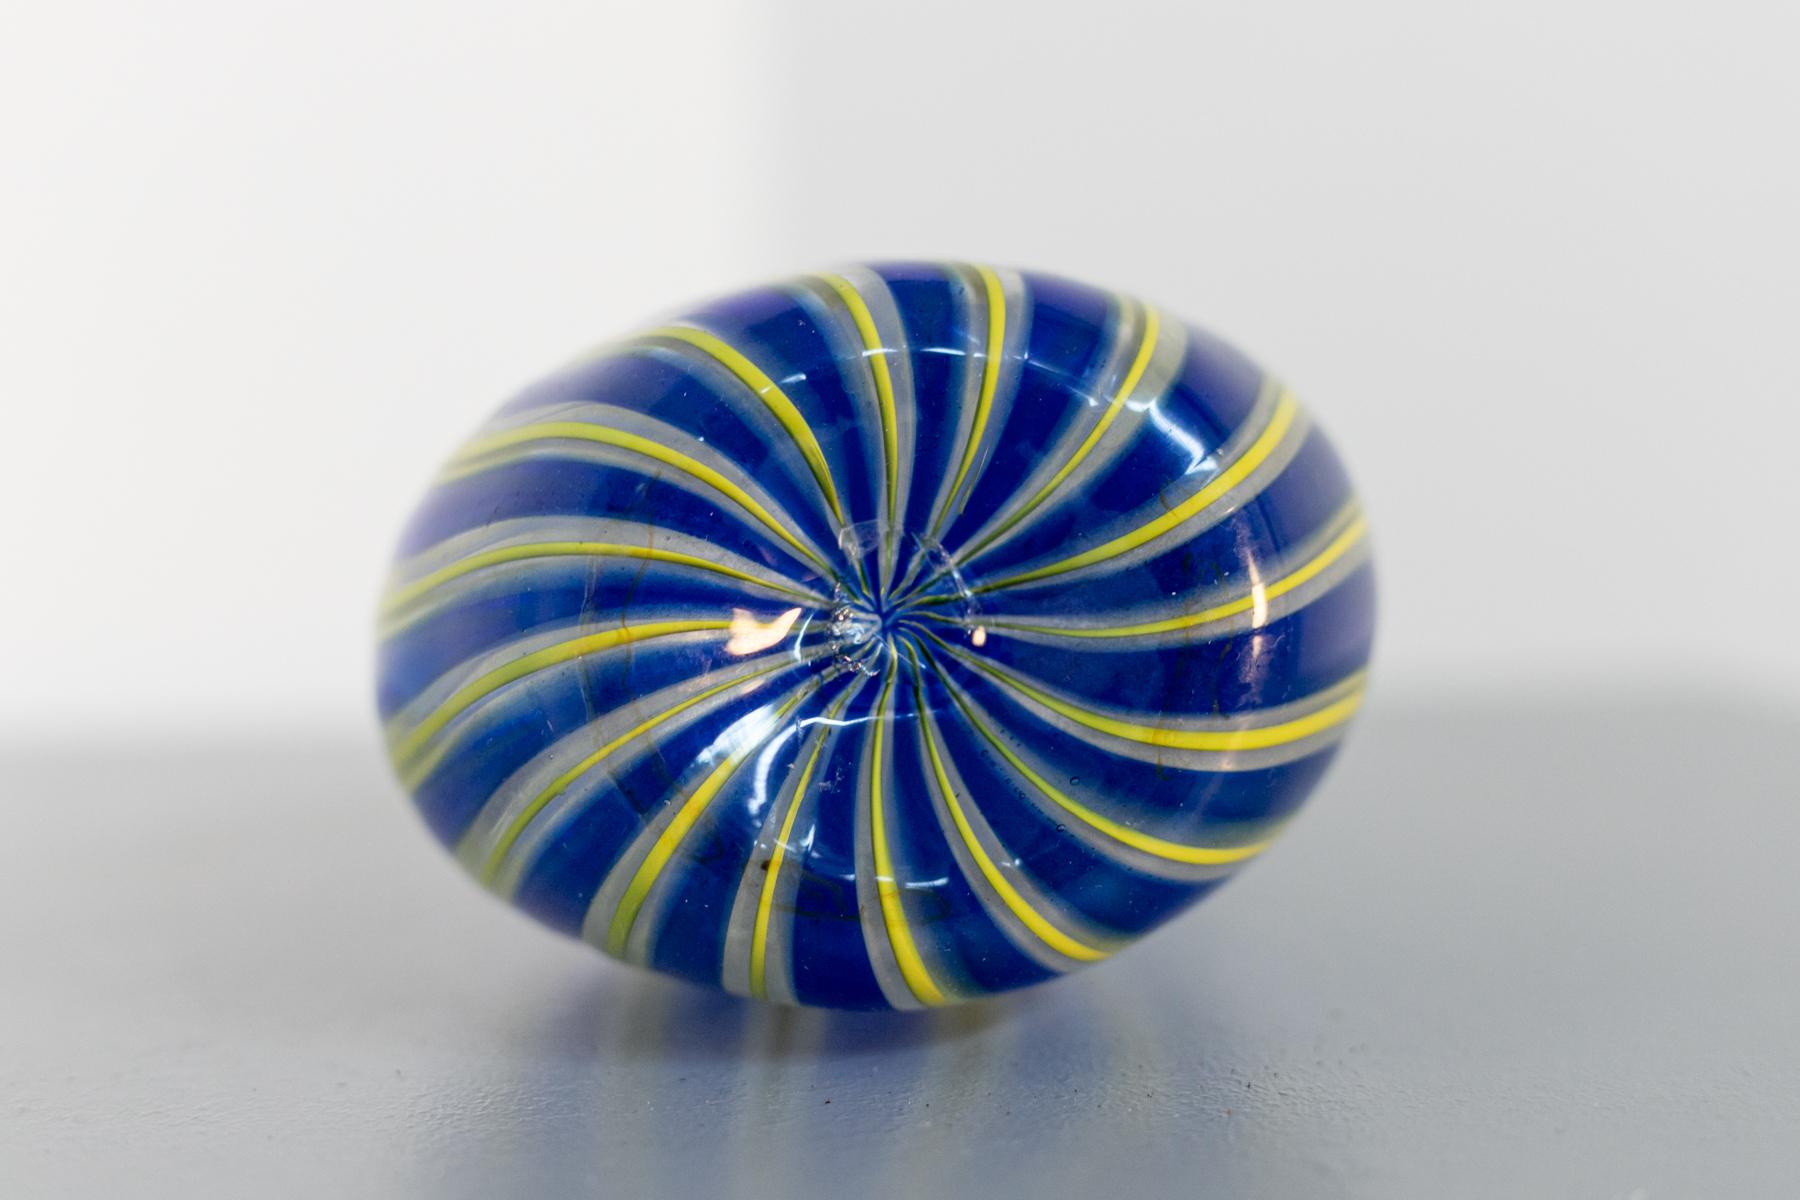 Beautiful vase made of Murano glass attributed to the great Venini of the '50s. 
The colours are bright and contrasting, the processing of the yellow and blue coloured glass creates a spiral under the base and gives an enveloping effect. It is